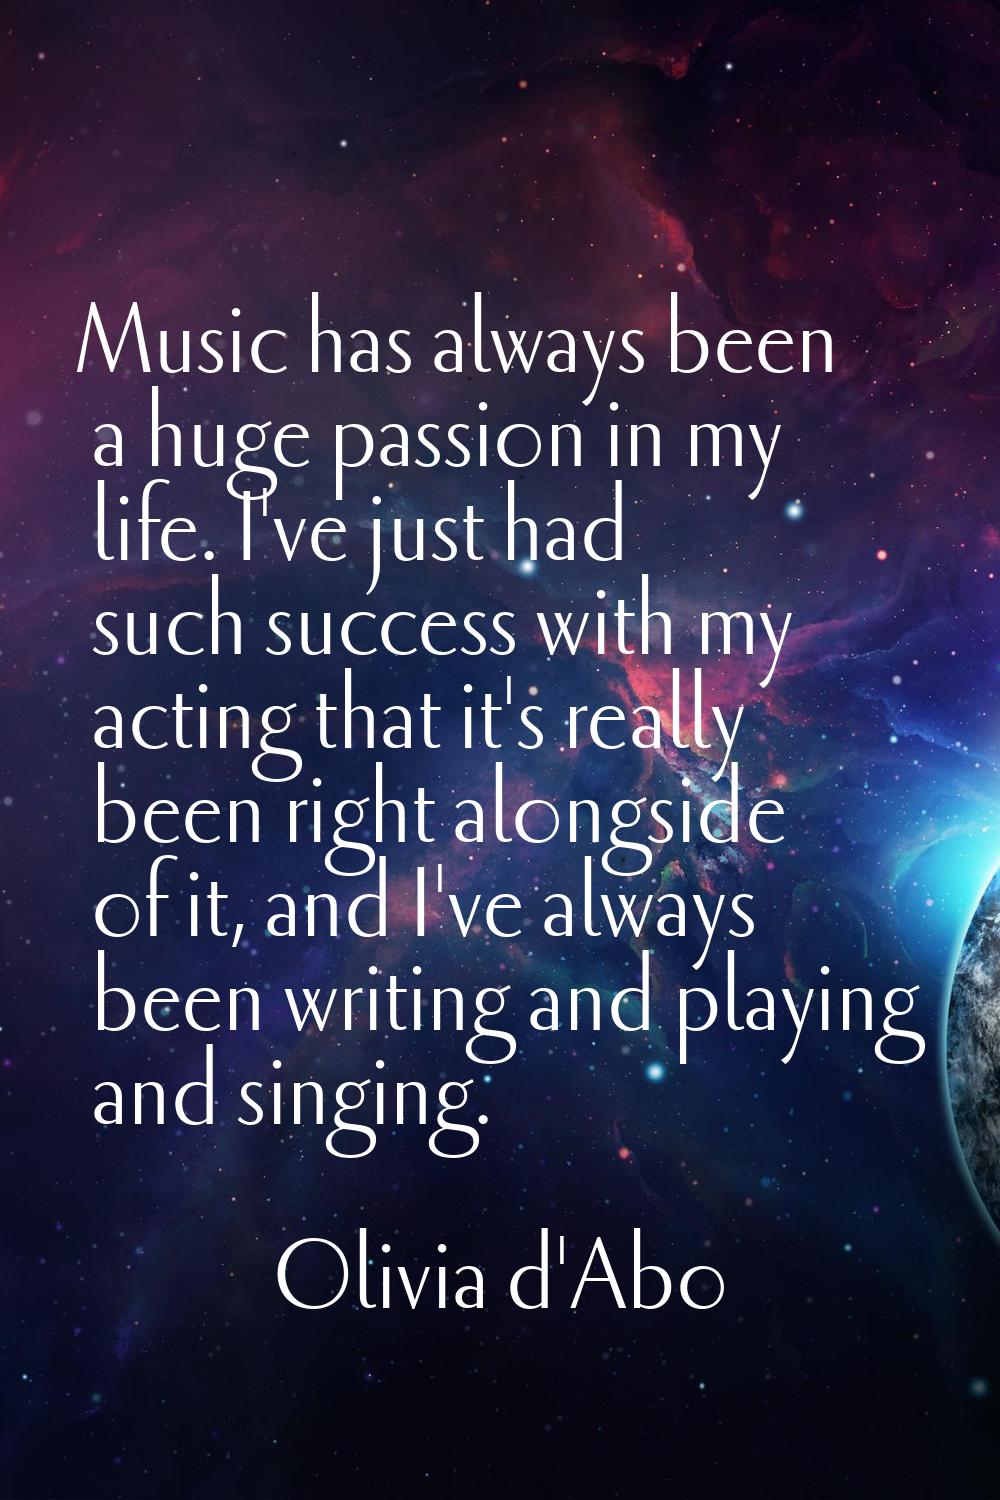 Music has always been a huge passion in my life. I've just had such success with my acting that it'